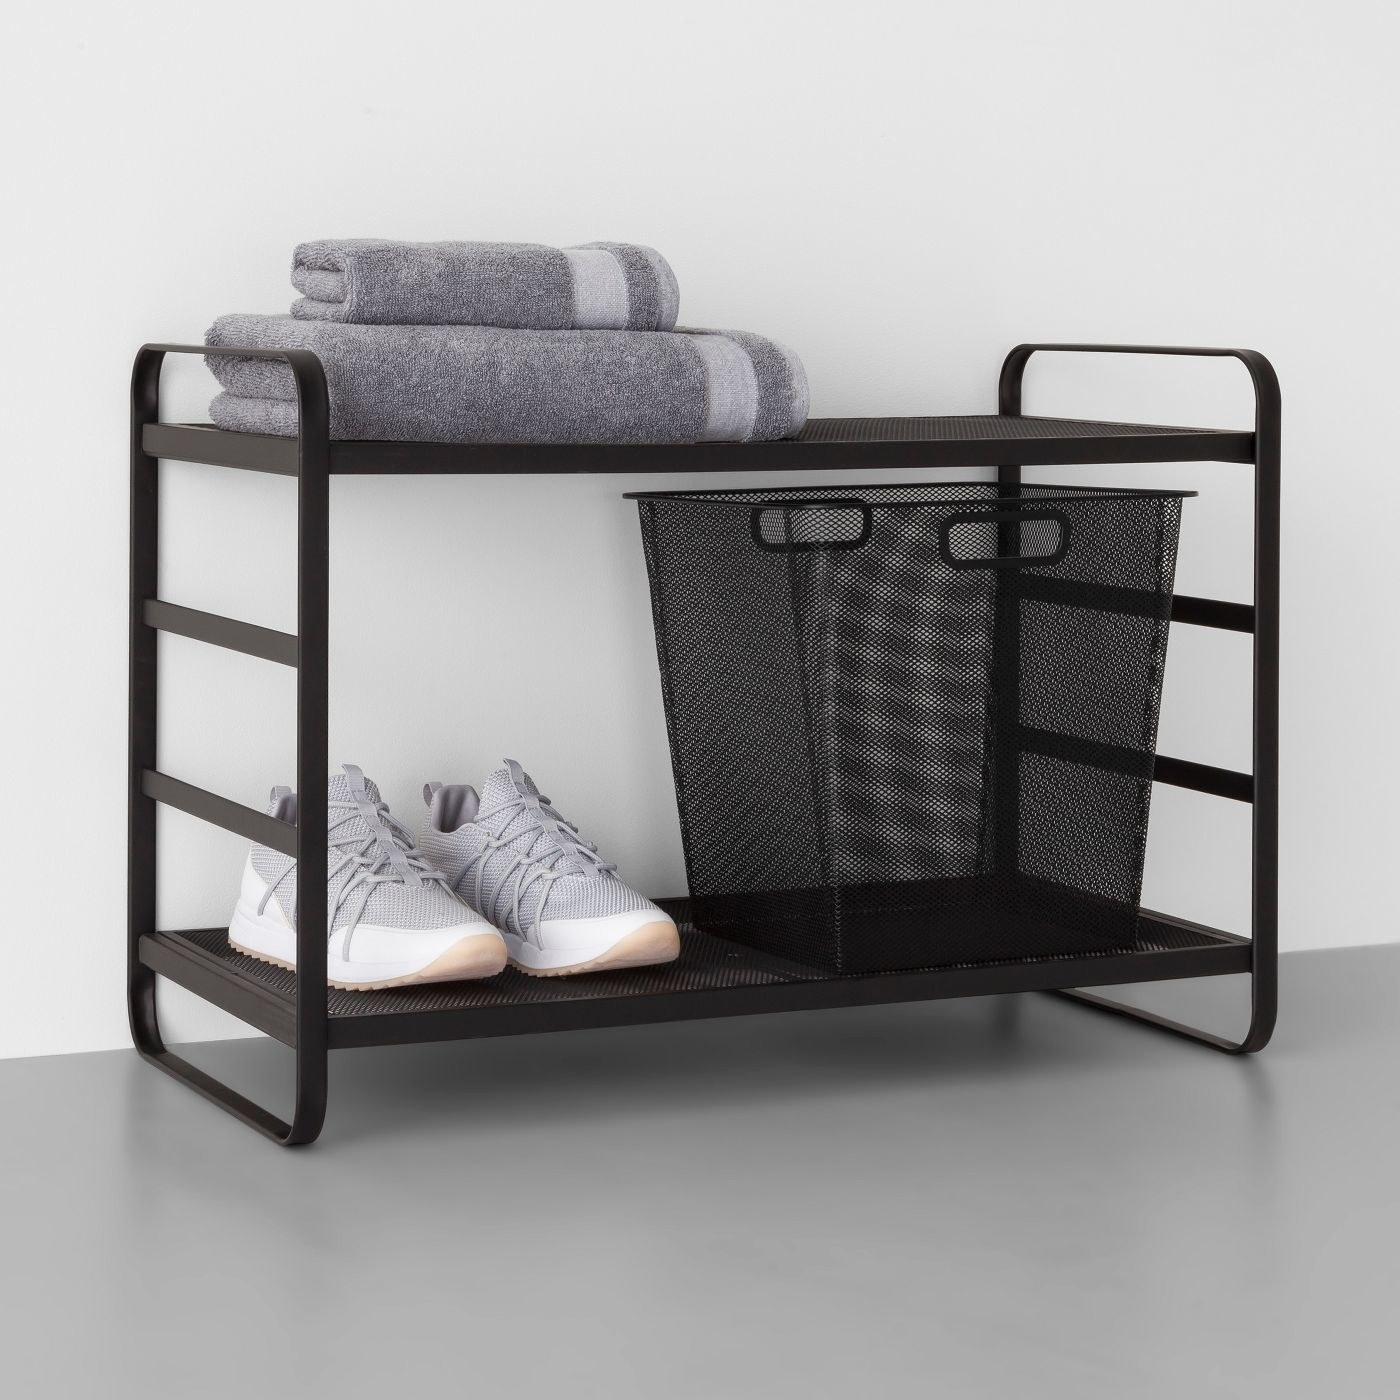 the black mesh rack with shoes and a towel